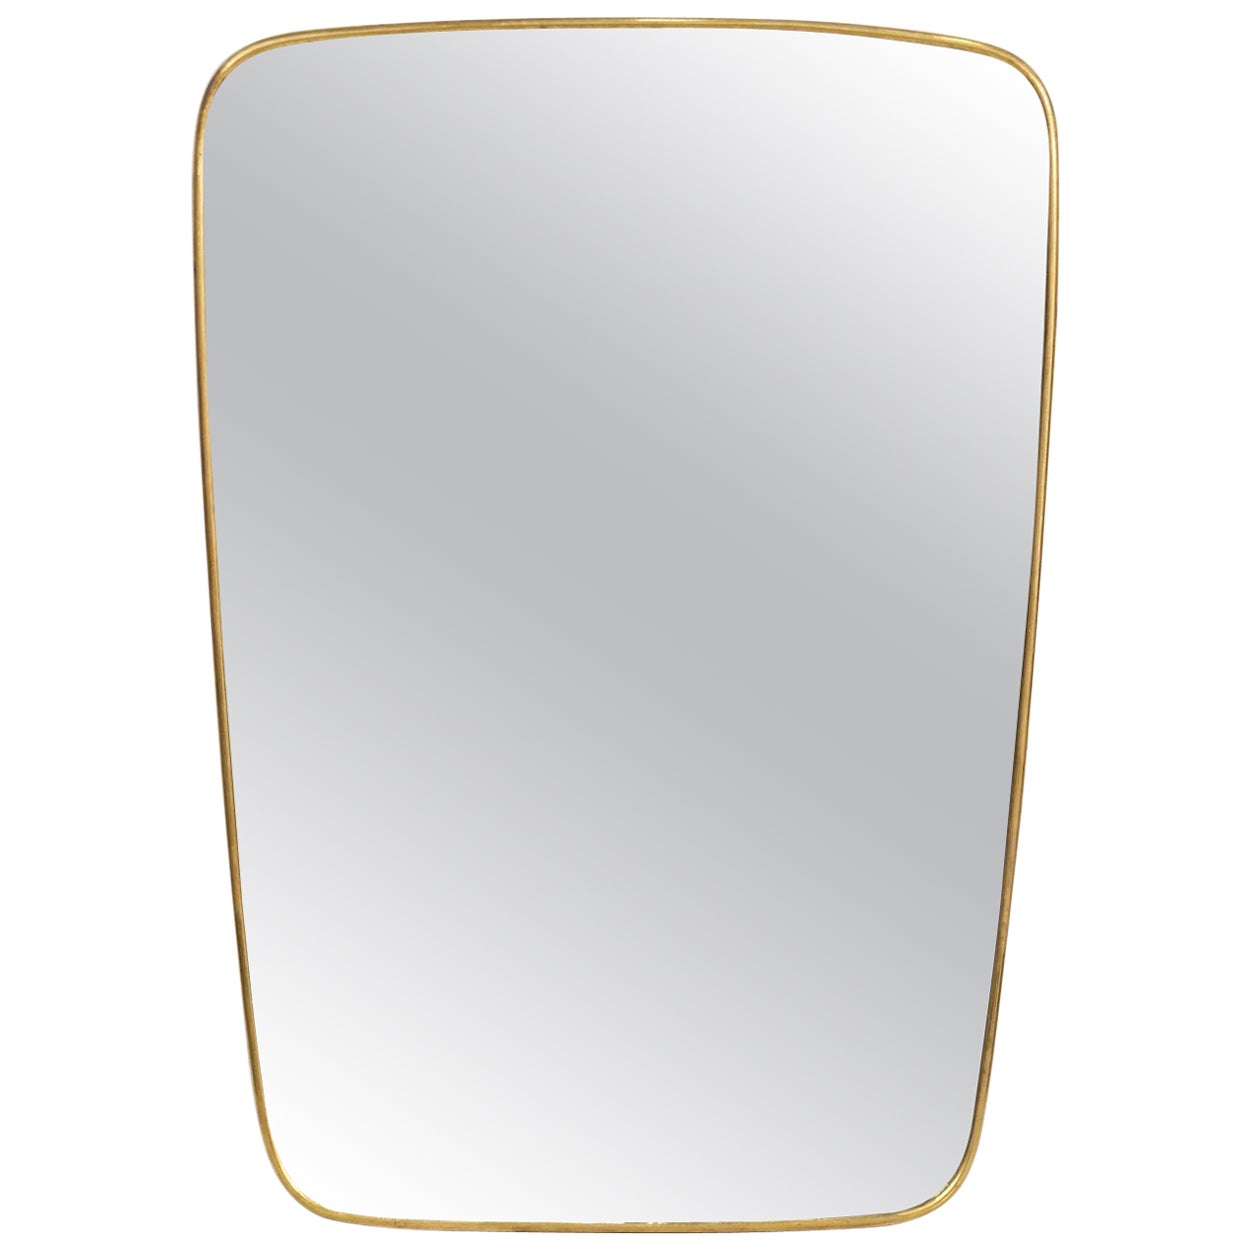 Gio Ponti Style Modernist Mirror with Brass Frame from Italy (H 28 x W 20)